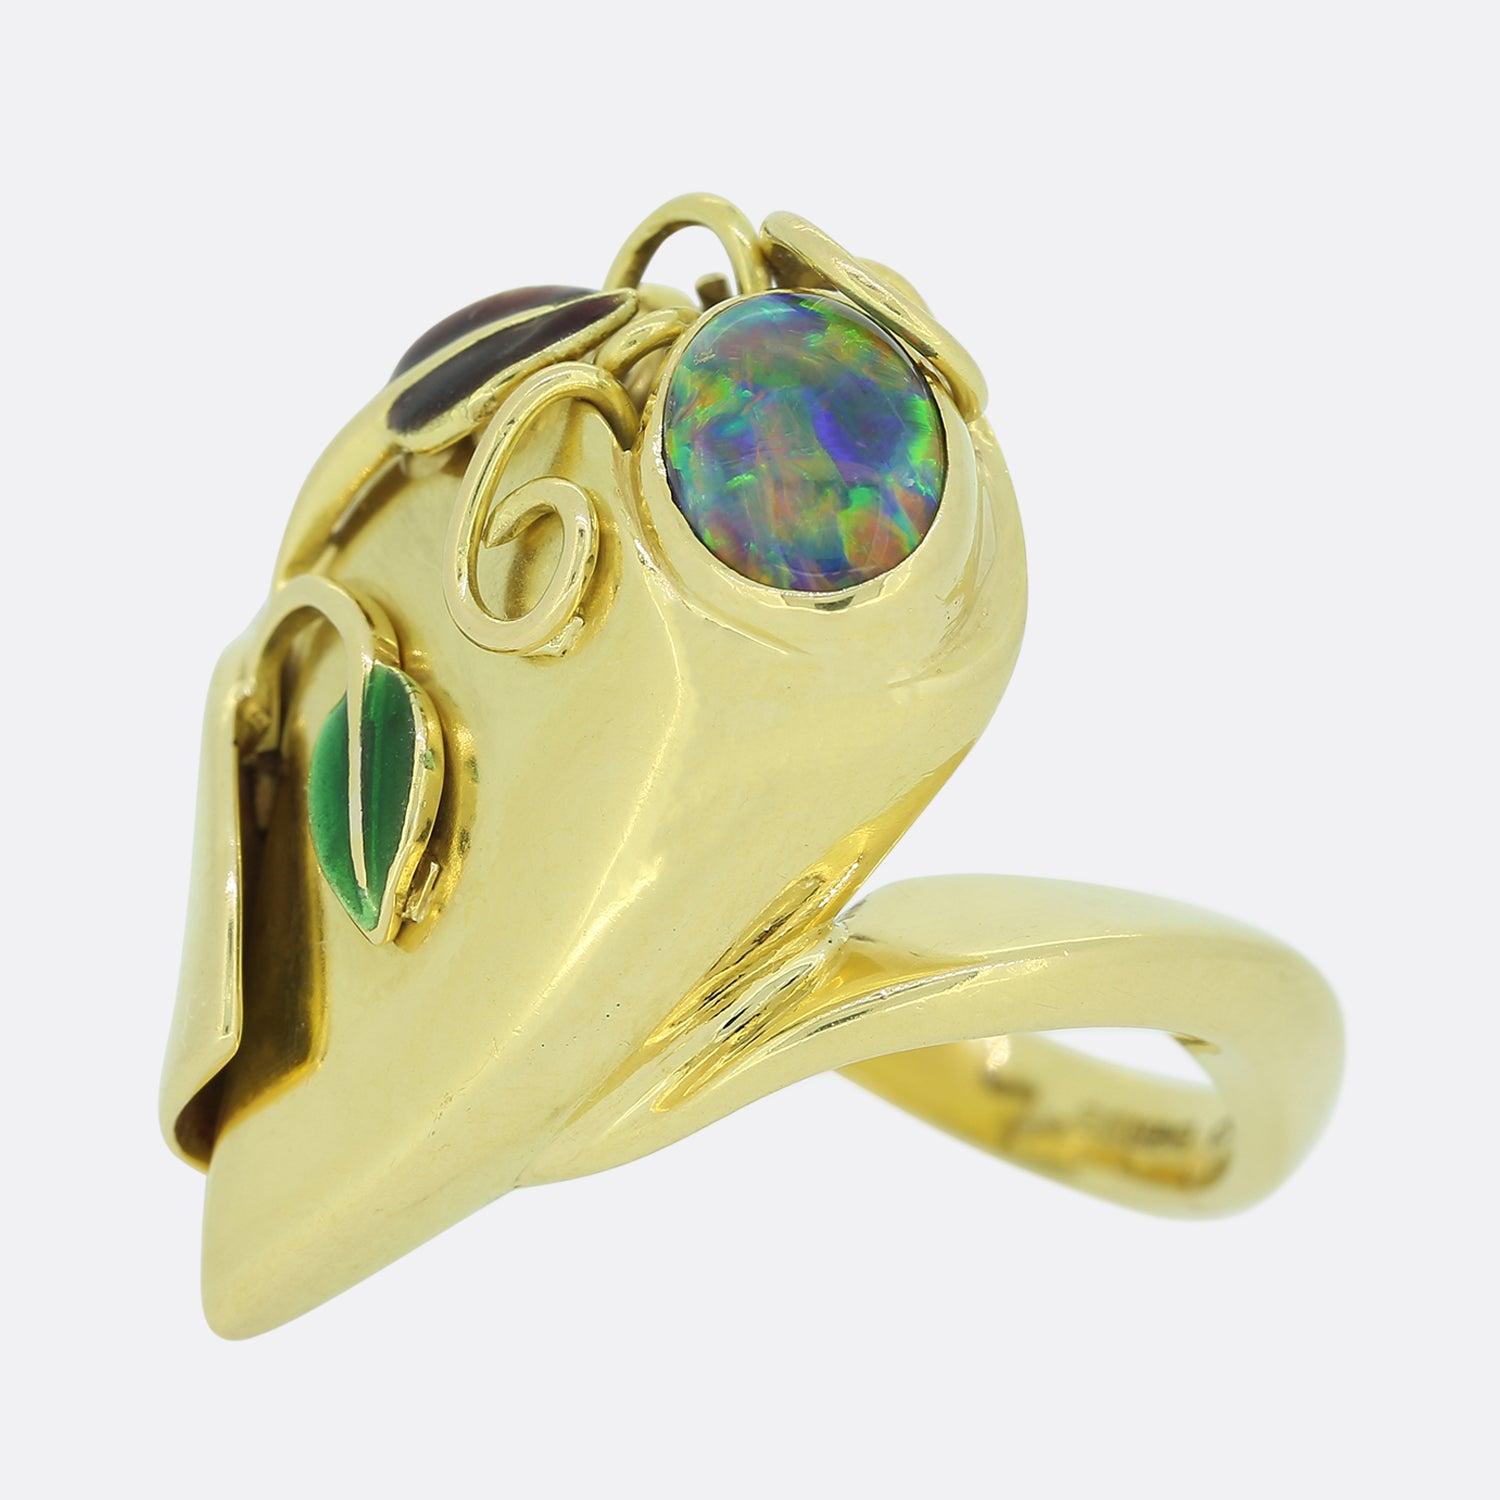 This vintage ring plays host to an oval black opal which is surrounded by green and purple enamel in a floral pattern and crafted in 18ct yellow gold. The opal has a wonderful play off colour and is a highly desirable tone.

Condition: Used (Very